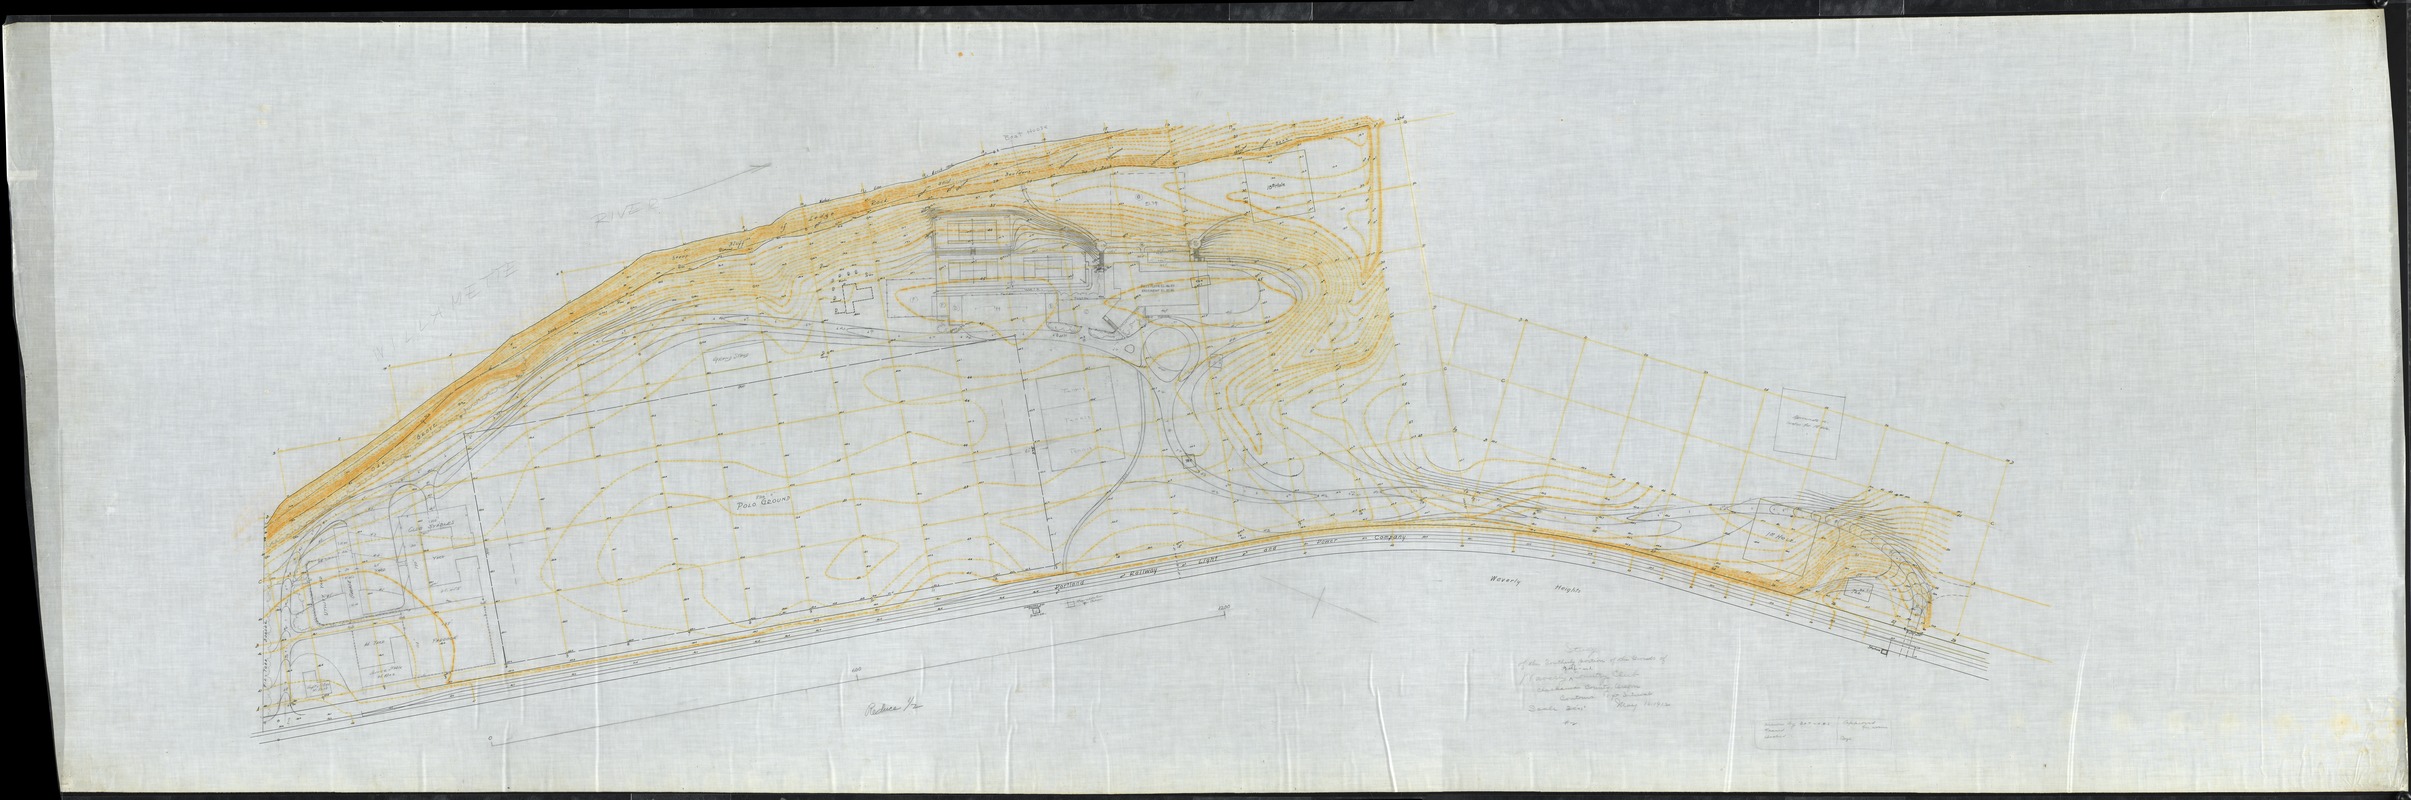 Study/ for the Southerly Portion of the Grounds of/ Waverly Golf and Country Club/ Clackamas County, OR. [r]/; Scale 30'= 1" [pi]